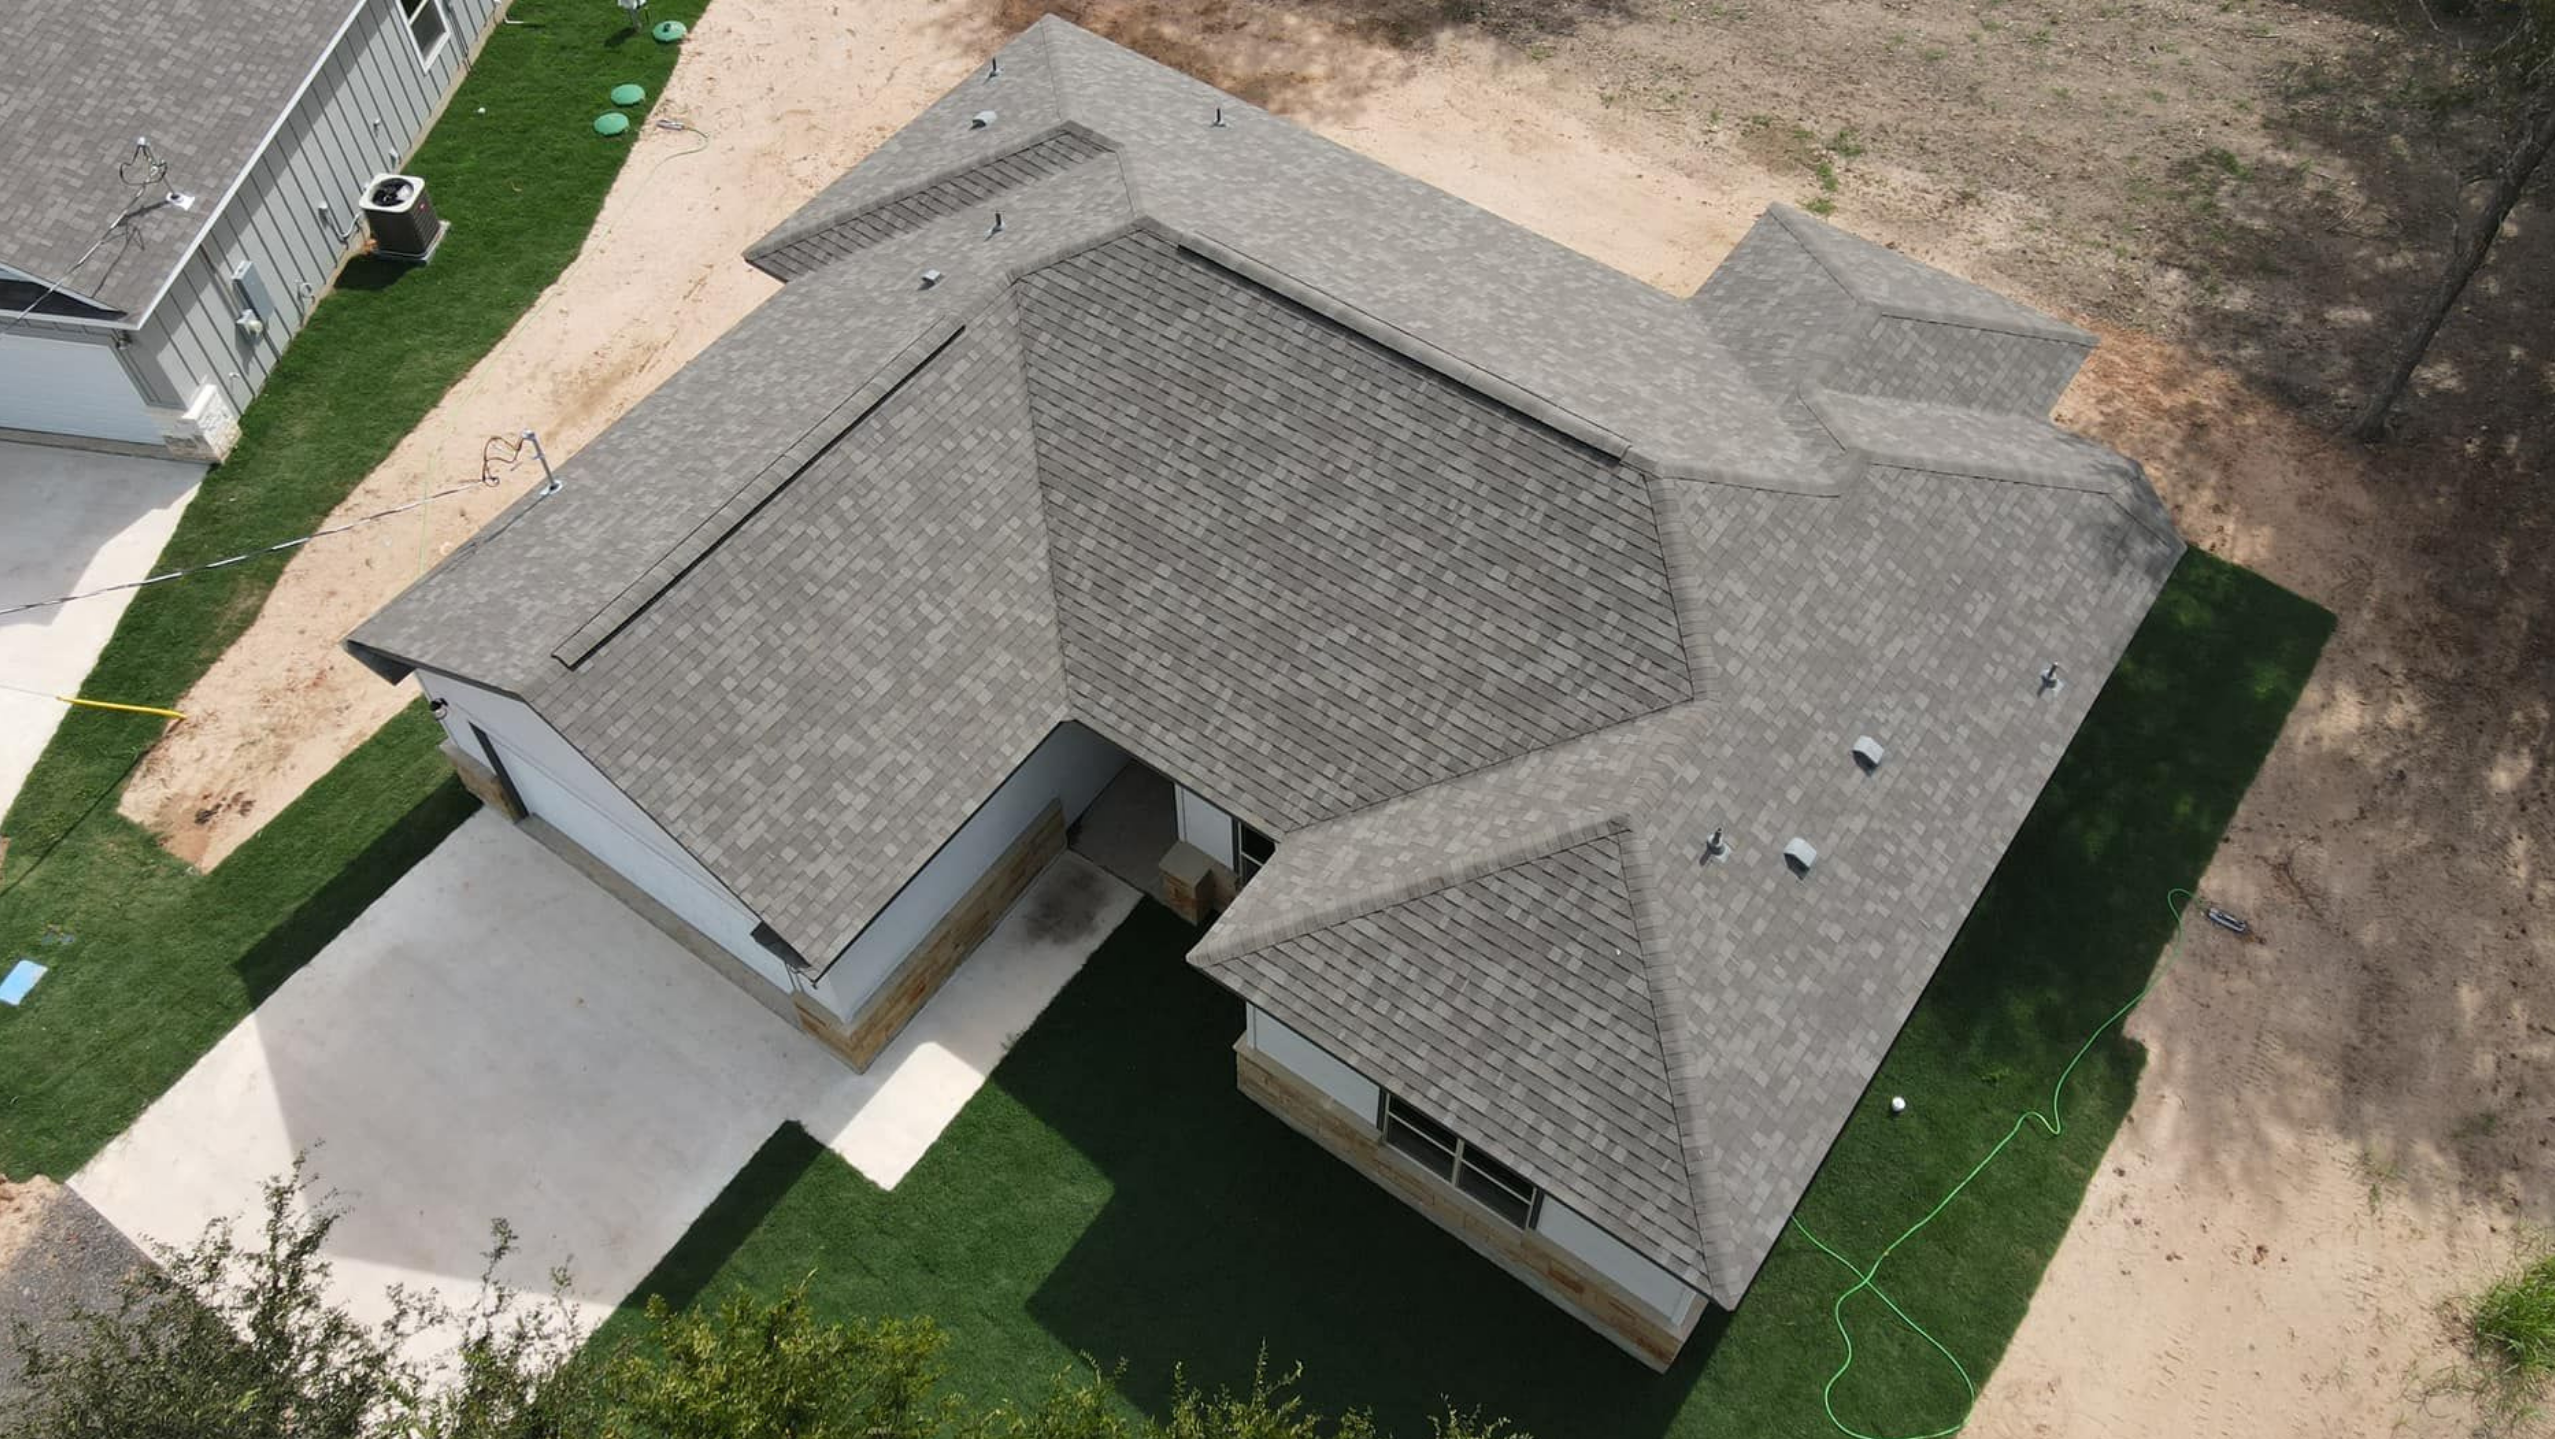 Best Elgin, TX Roofing Contractor For Metal Roof Repairs Offers Free Inspections